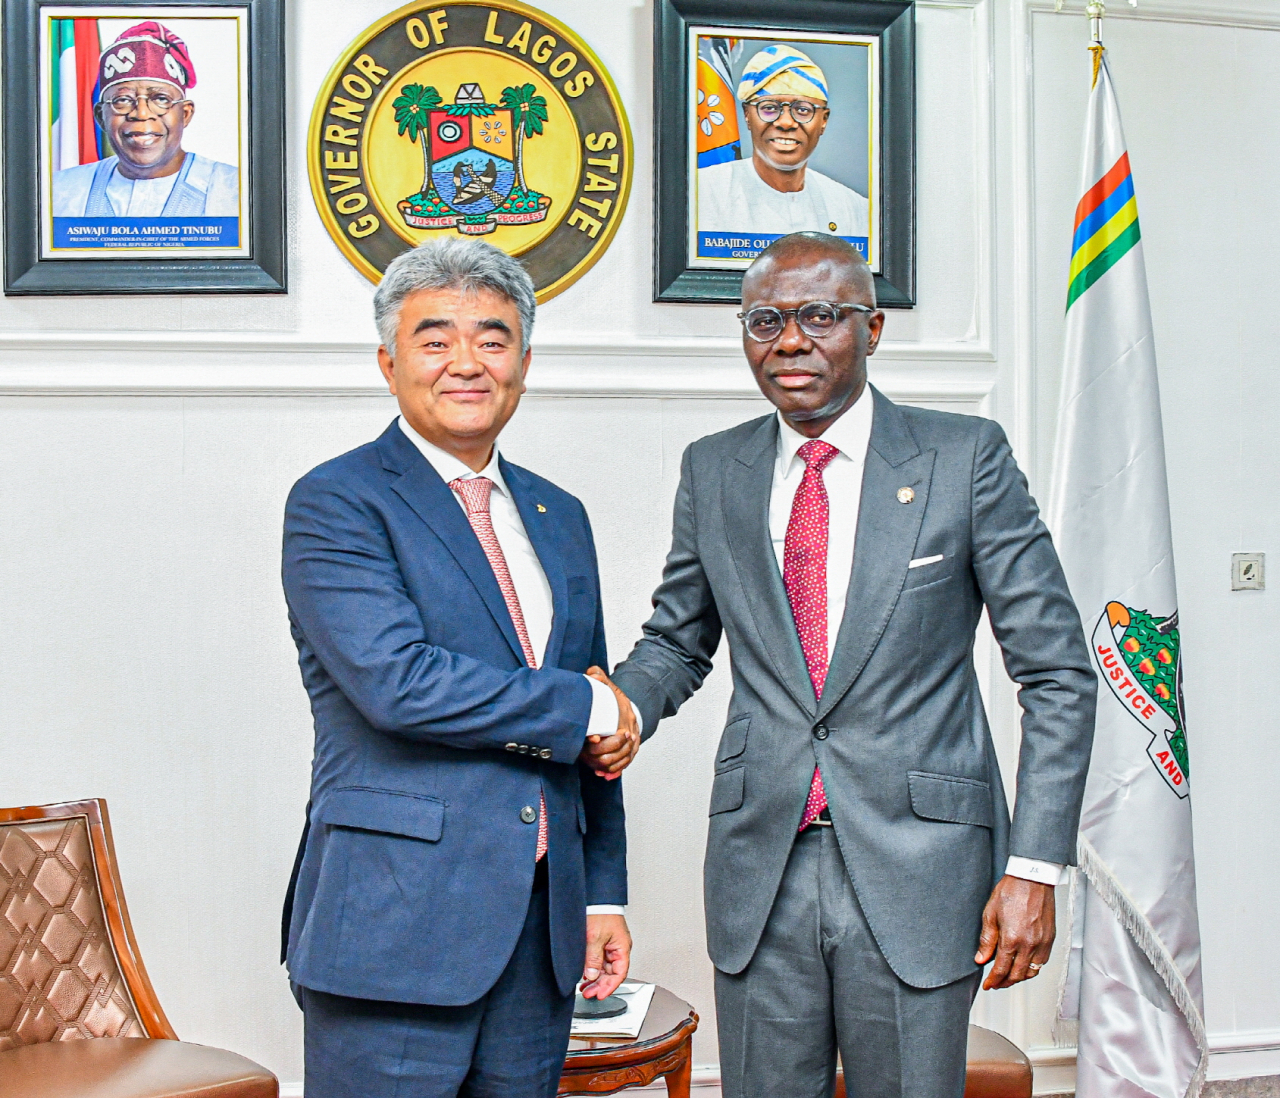 Daewoo E&C Chairman Jung Won-ju (left) shakes hands with Babajide Sanwo-Olu, the governor of Lagos state, in Lagos, Nigeria, Monday. (Daewoo E&C)